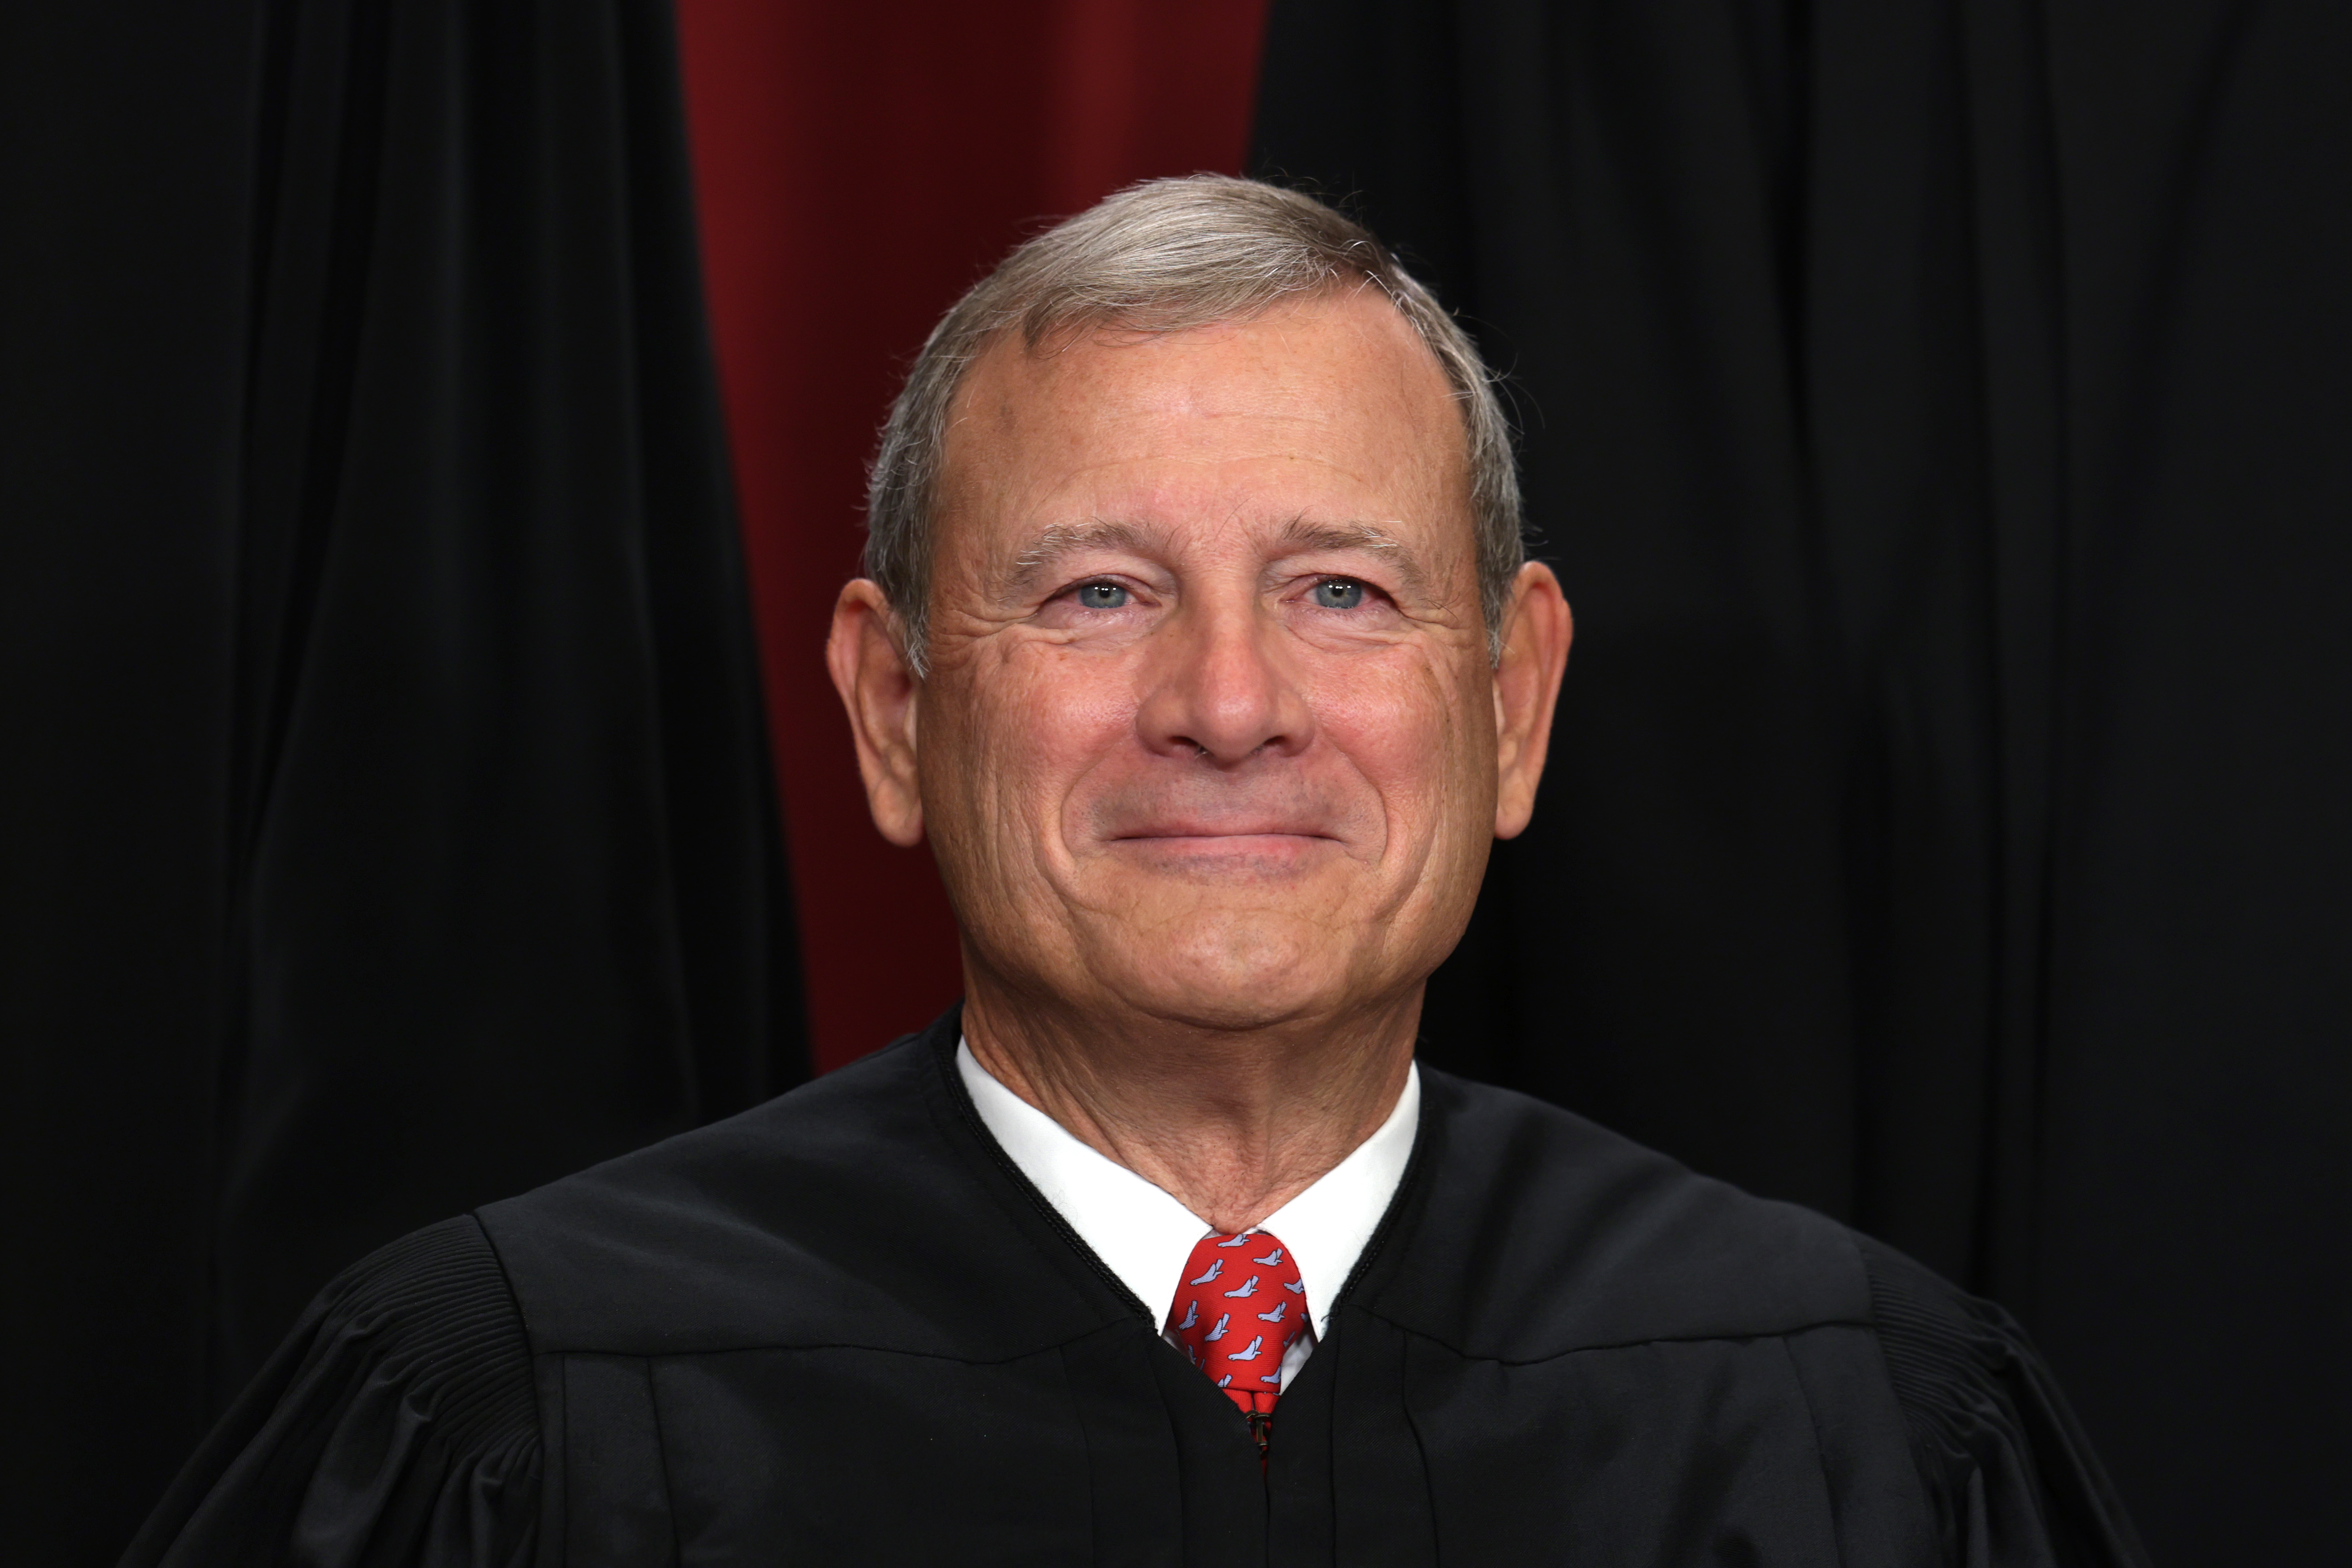 Chief Justice John Roberts poses for an official portrait at the Supreme Court in Washington, DC, in 2022.